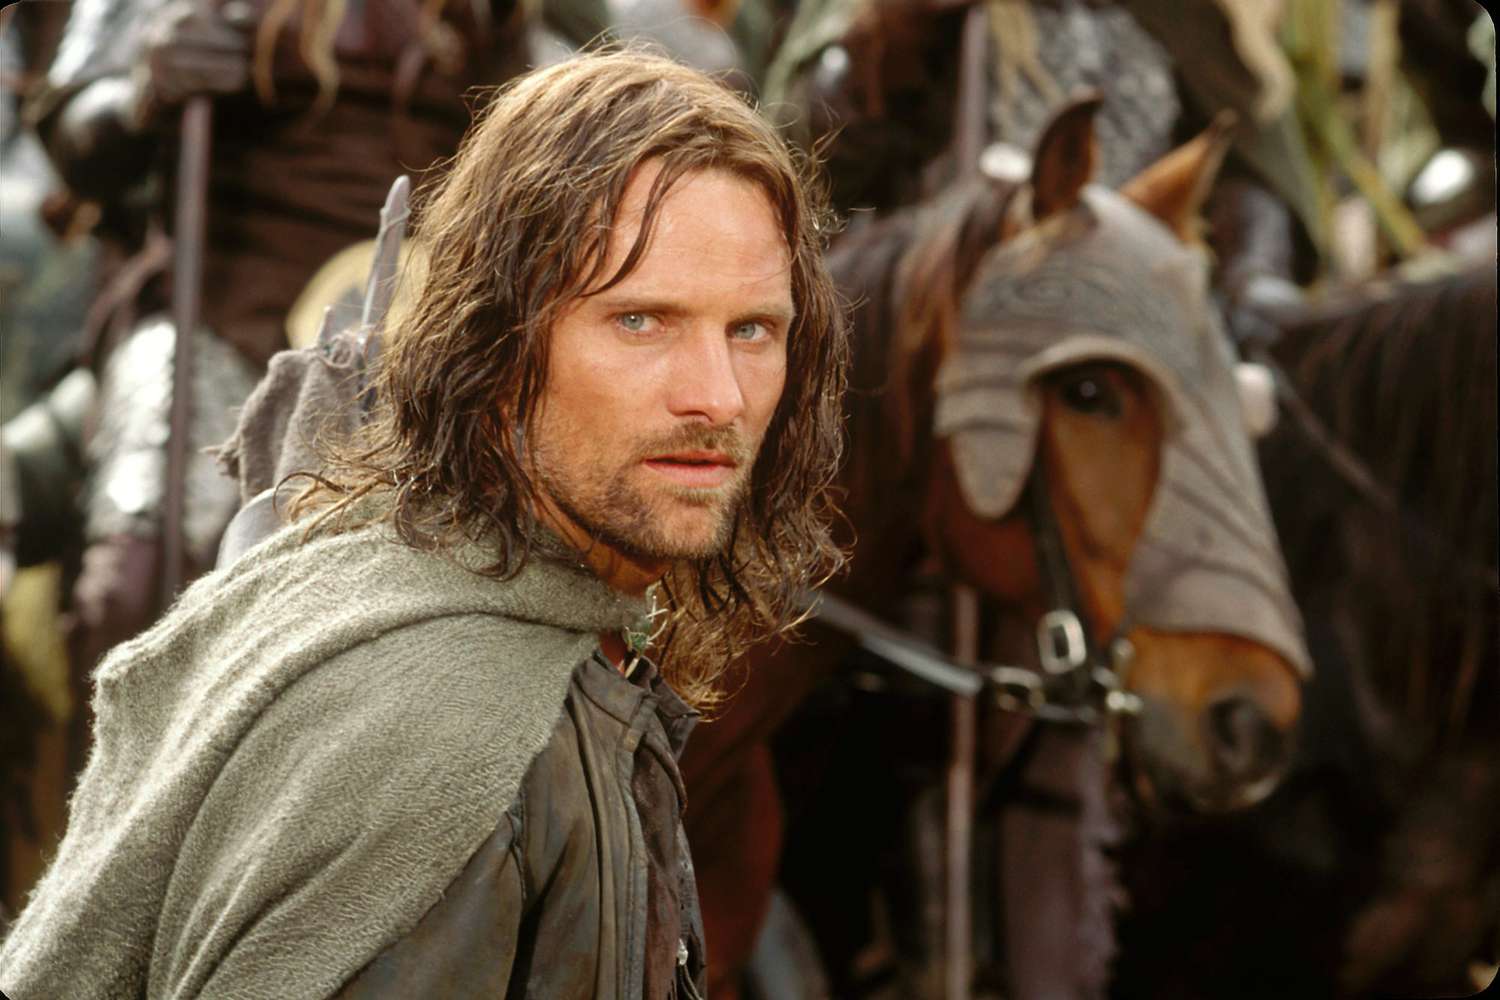 Afslachten tijger Loodgieter What should Amazon's Lord of the Rings series be about? | EW.com